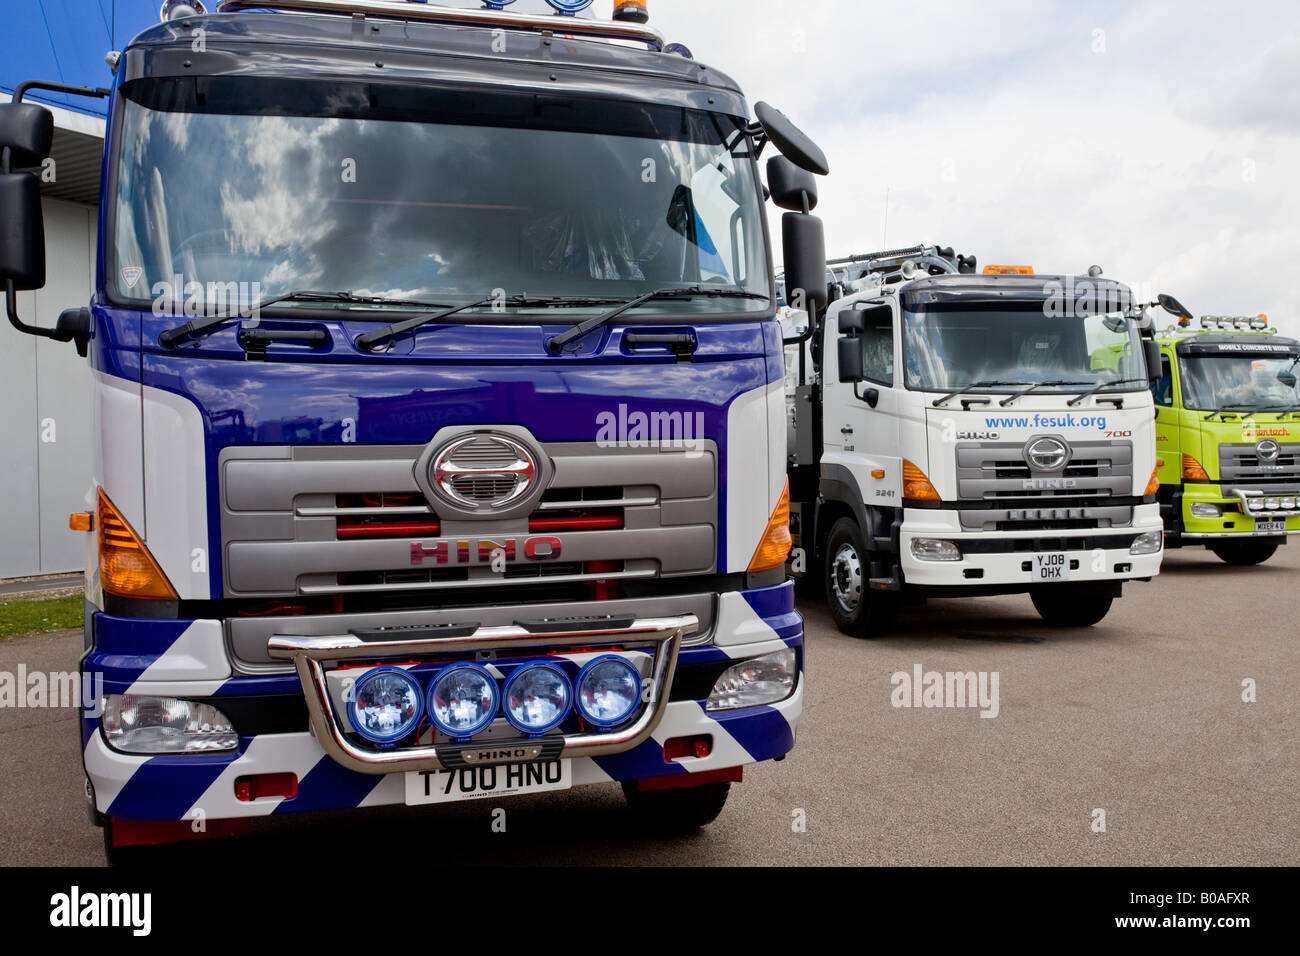 2008 Hino 700 Series trucks on display at the Commercial Vehicle Show, Birmingham, UK. Stock Photo